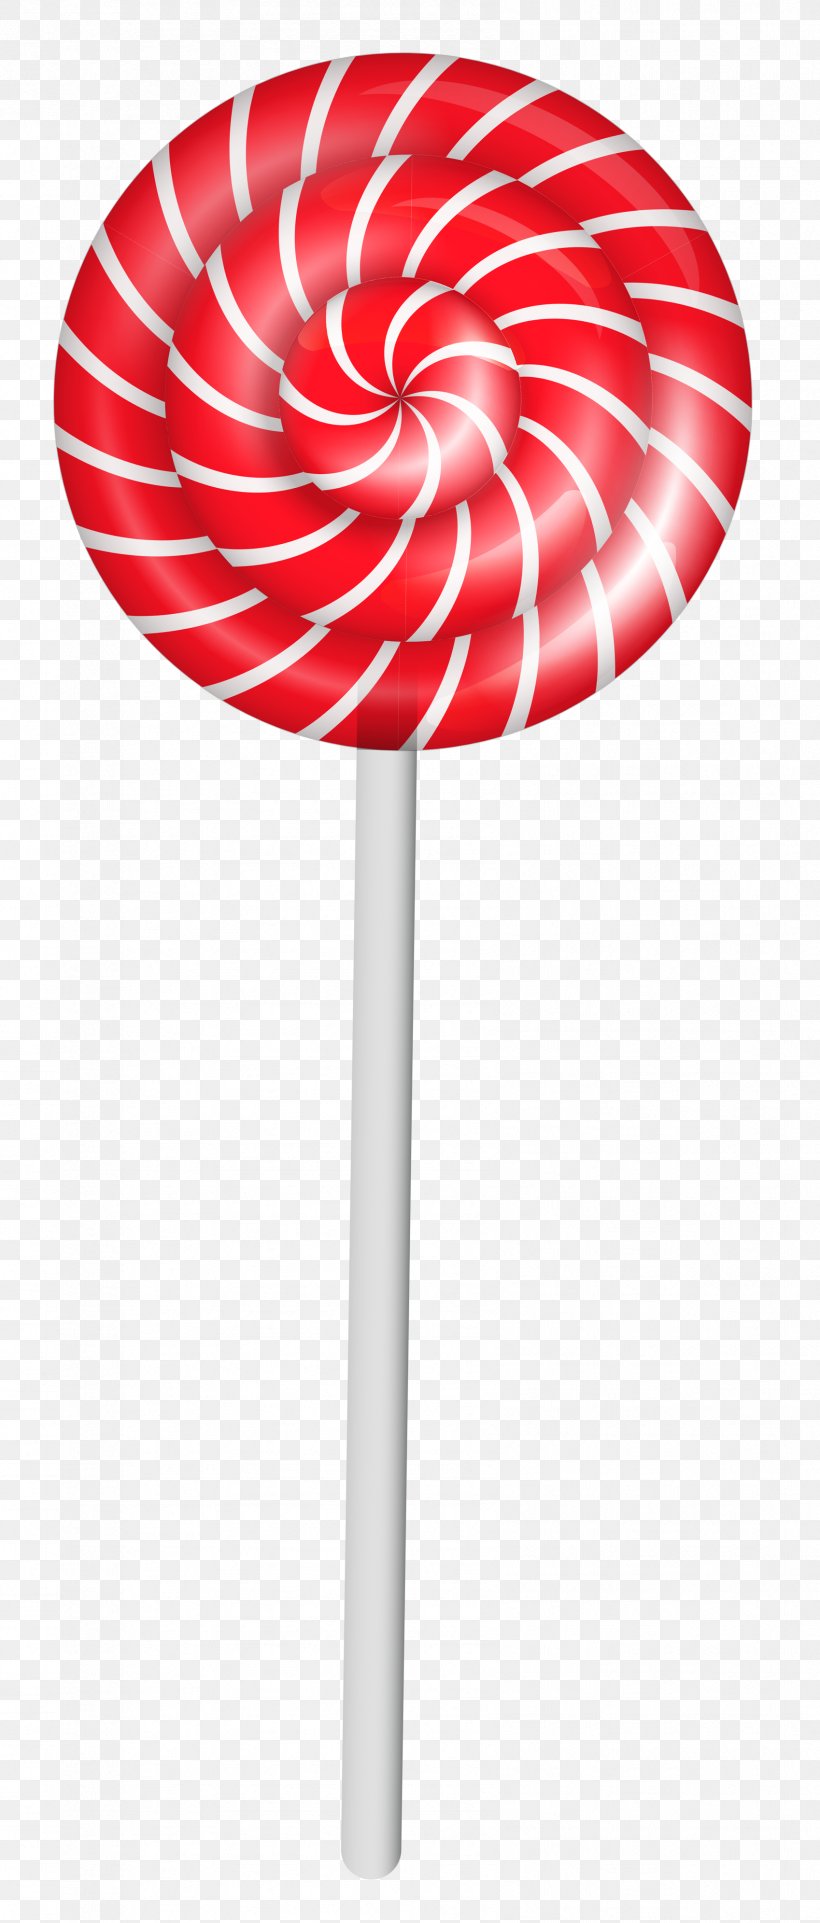 Android Lollipop Icon, PNG, 1698x3984px, Lollipop, Candy, Candy Cane, Caramel, Chocolate Download Free